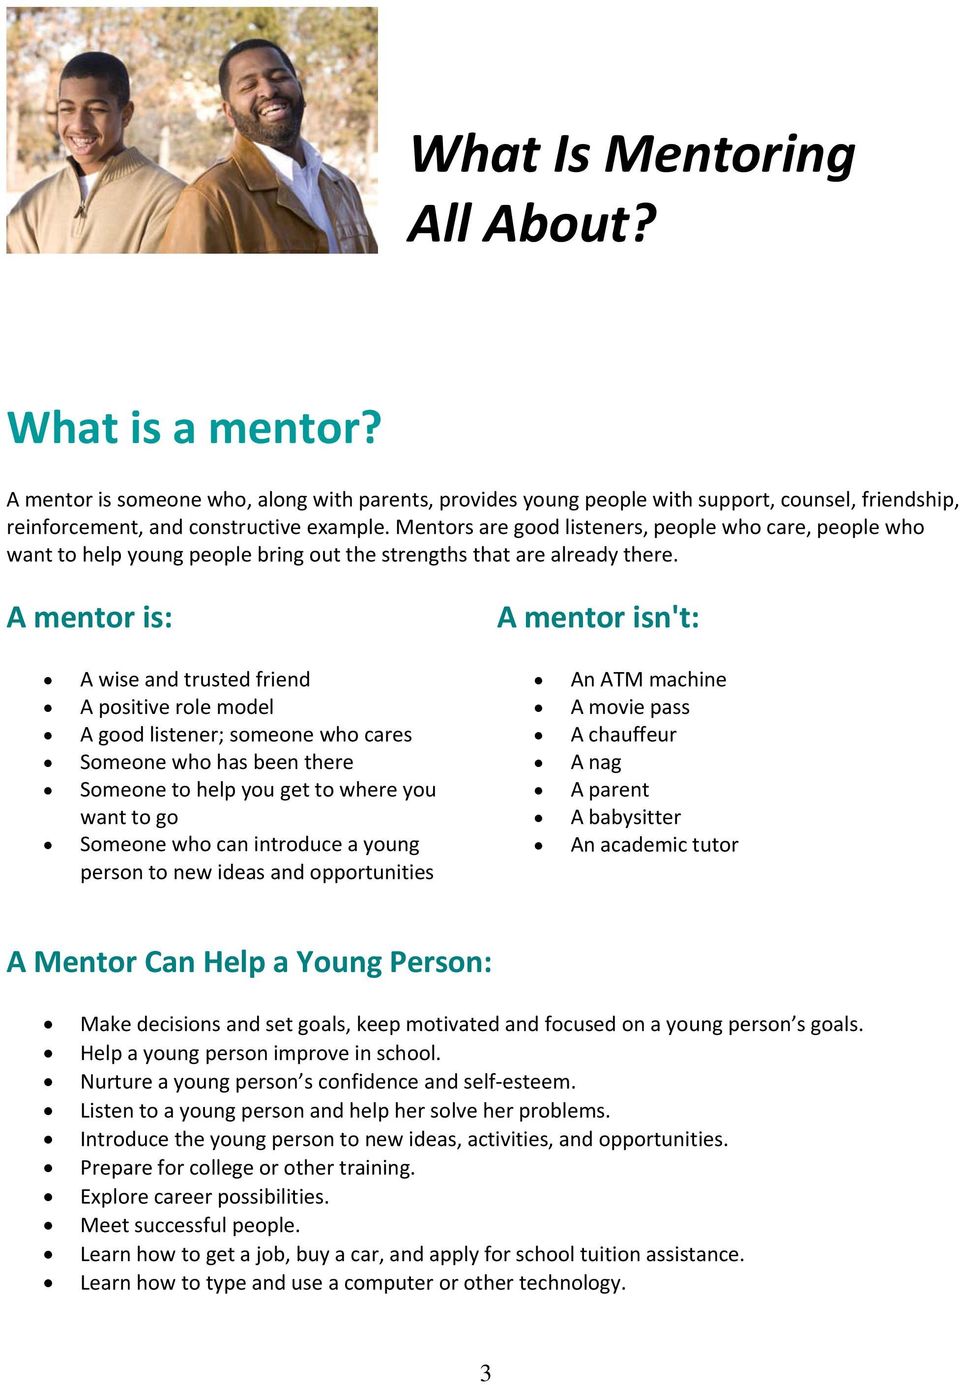 A mentor is: A wise and trusted friend A positive role model A good listener; someone who cares Someone who has been there Someone to help you get to where you want to go Someone who can introduce a